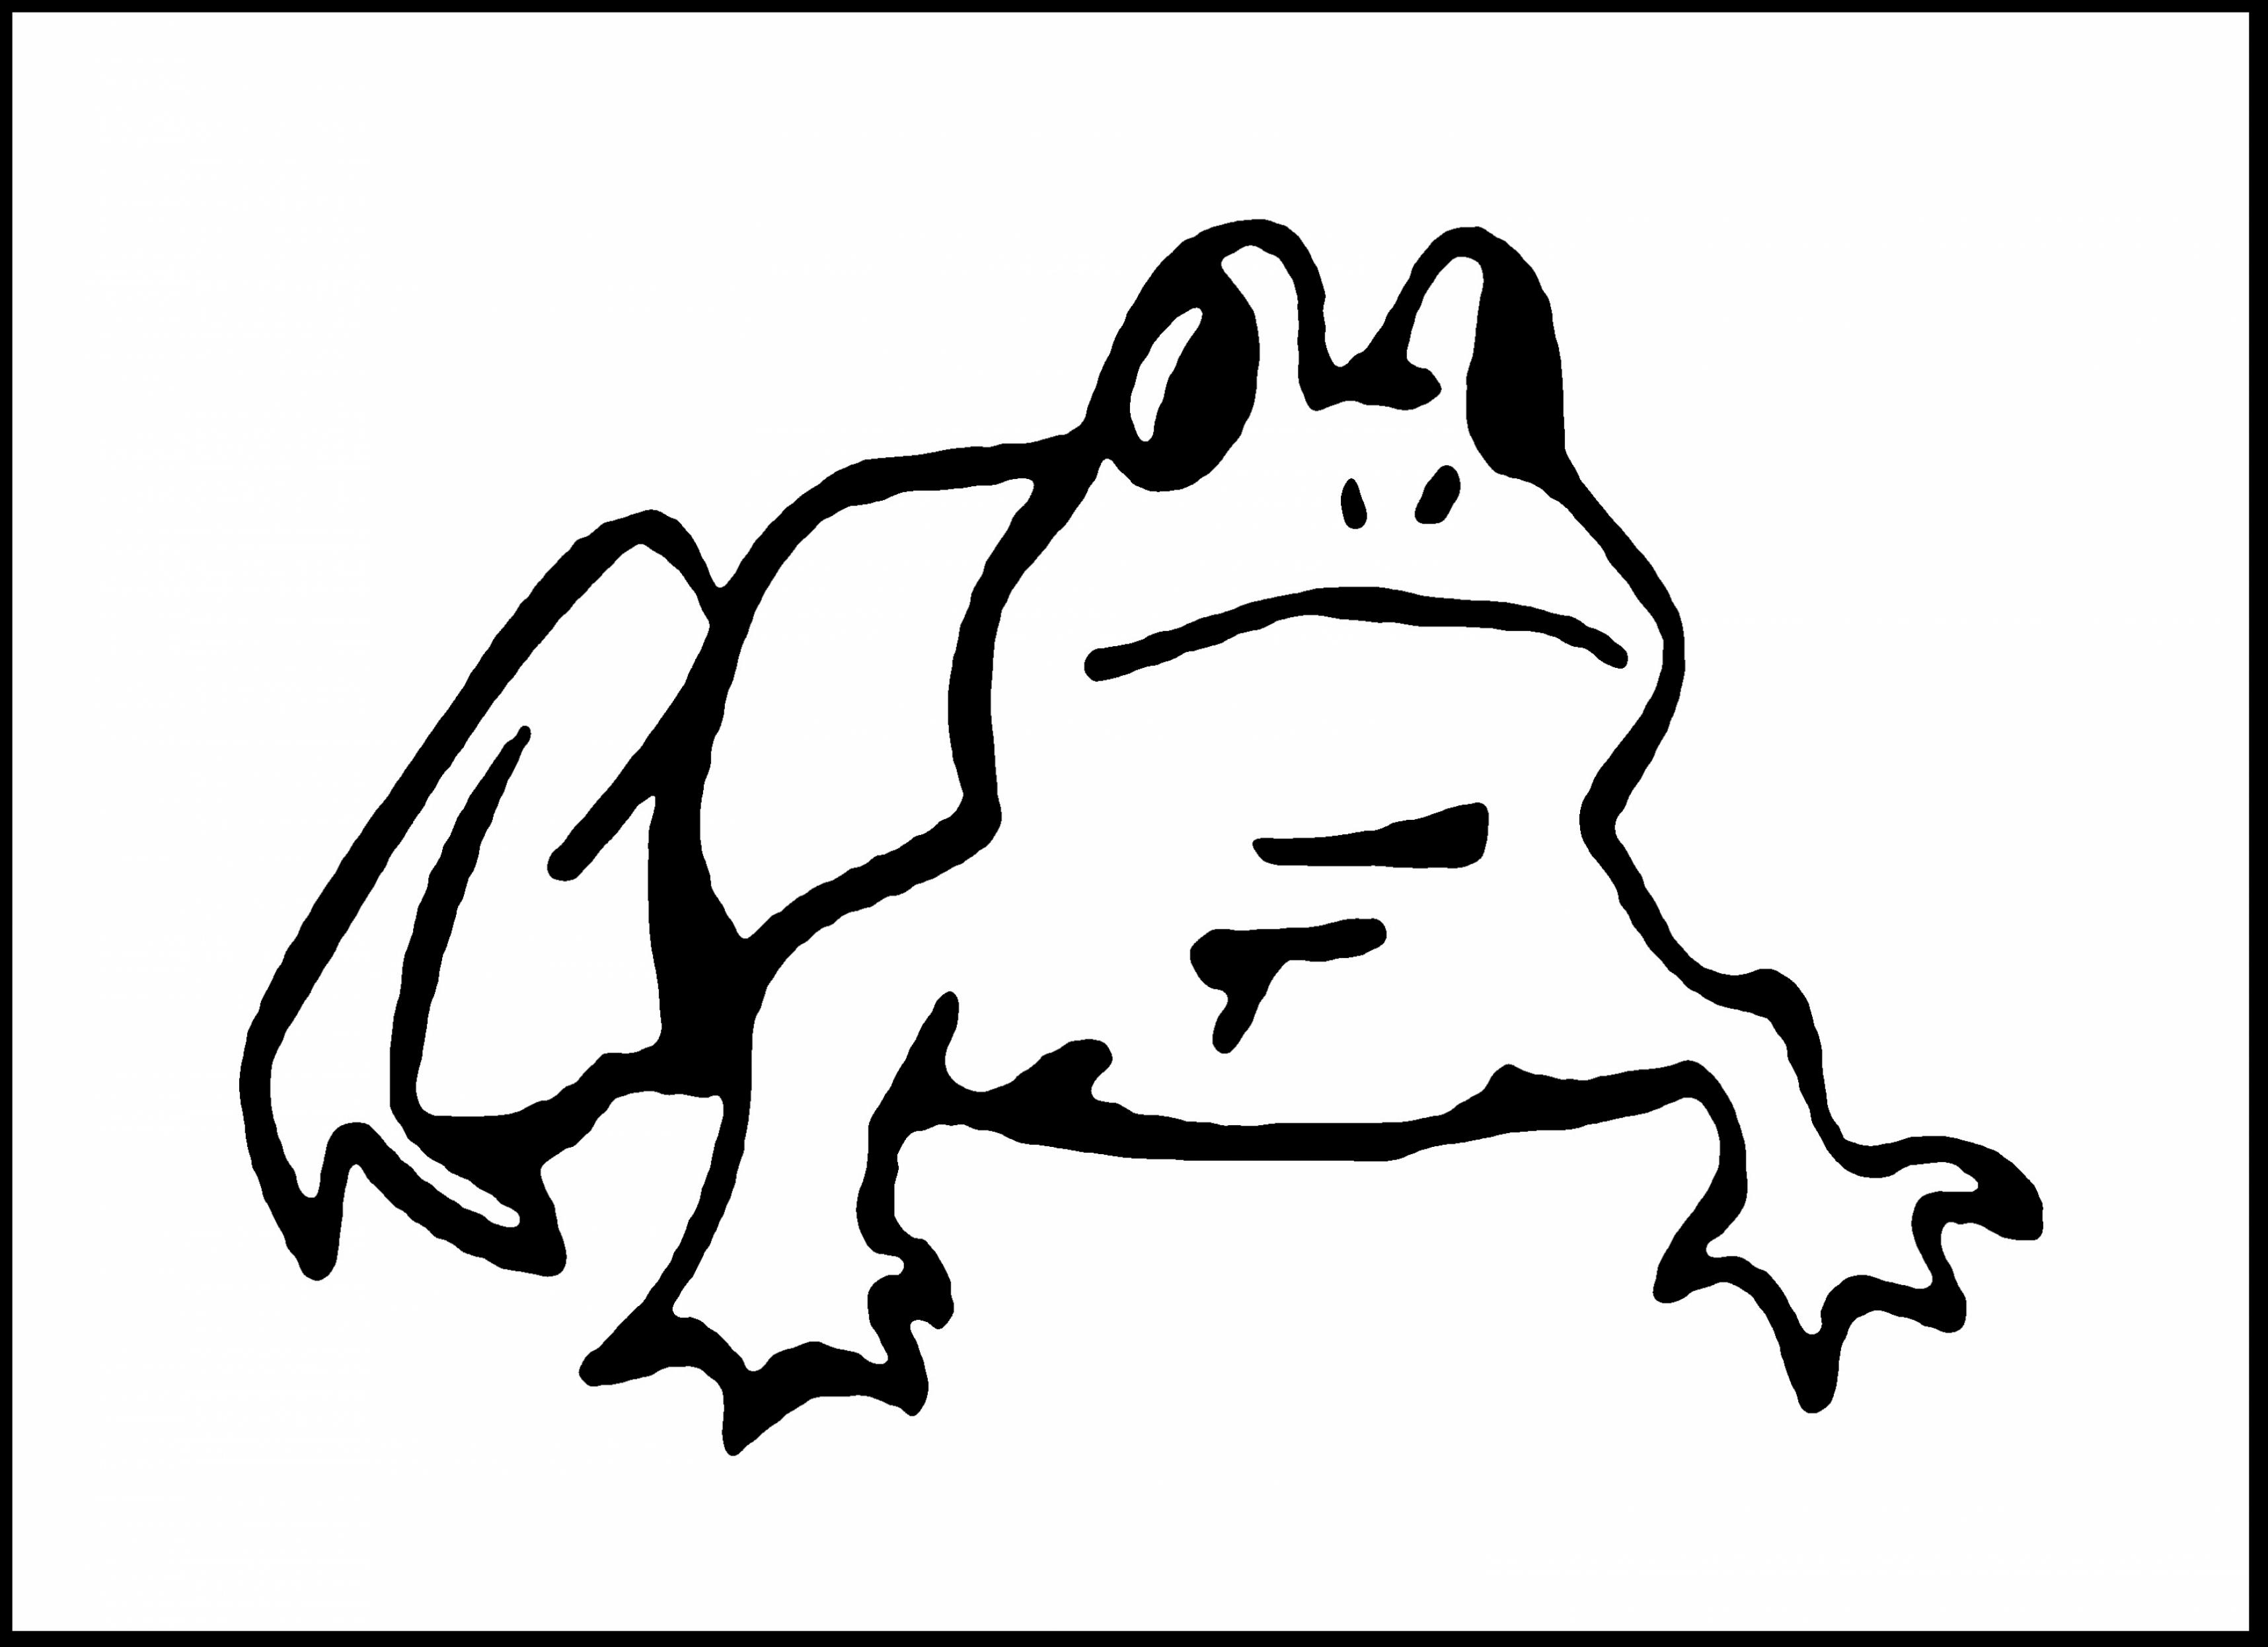 Magnificent Tree Frog coloring #5, Download drawings